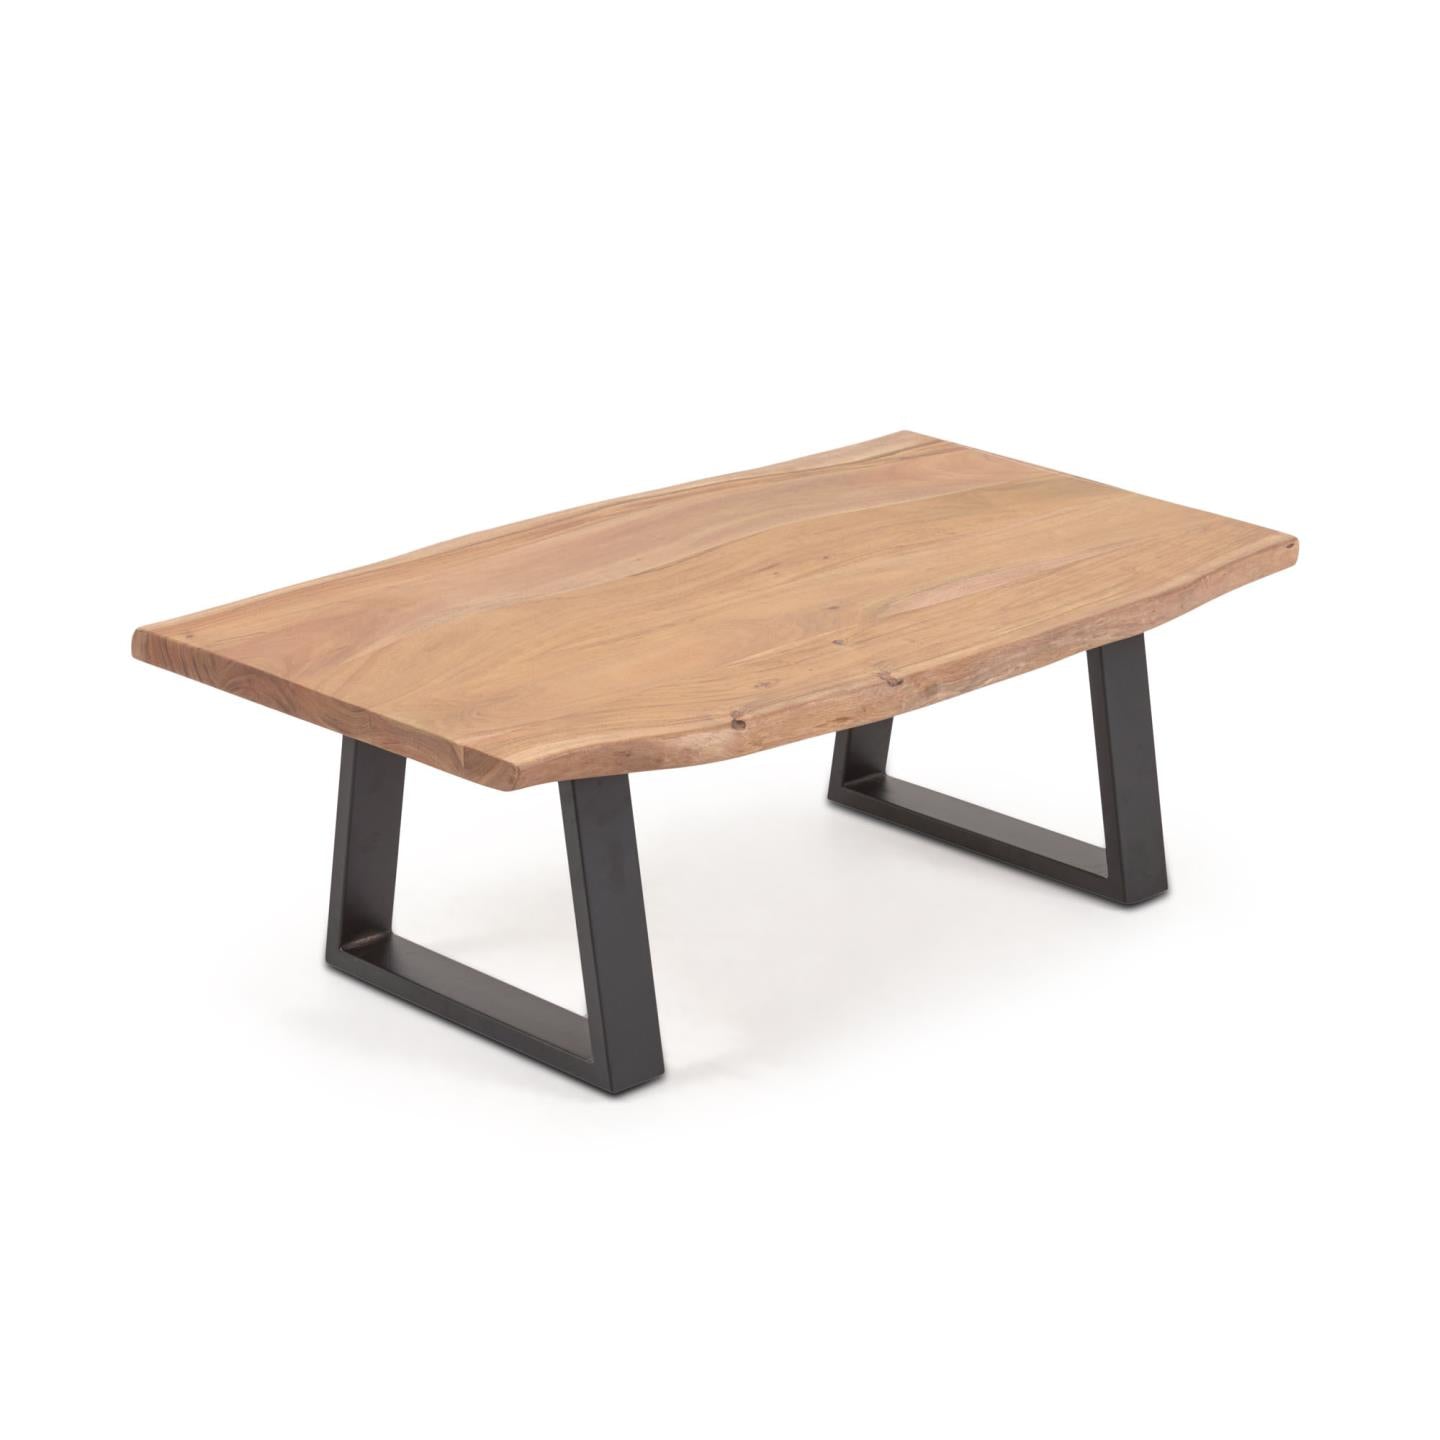 Alaia coffee table made from solid acacia wood with natural finish, 115 x 65 cm